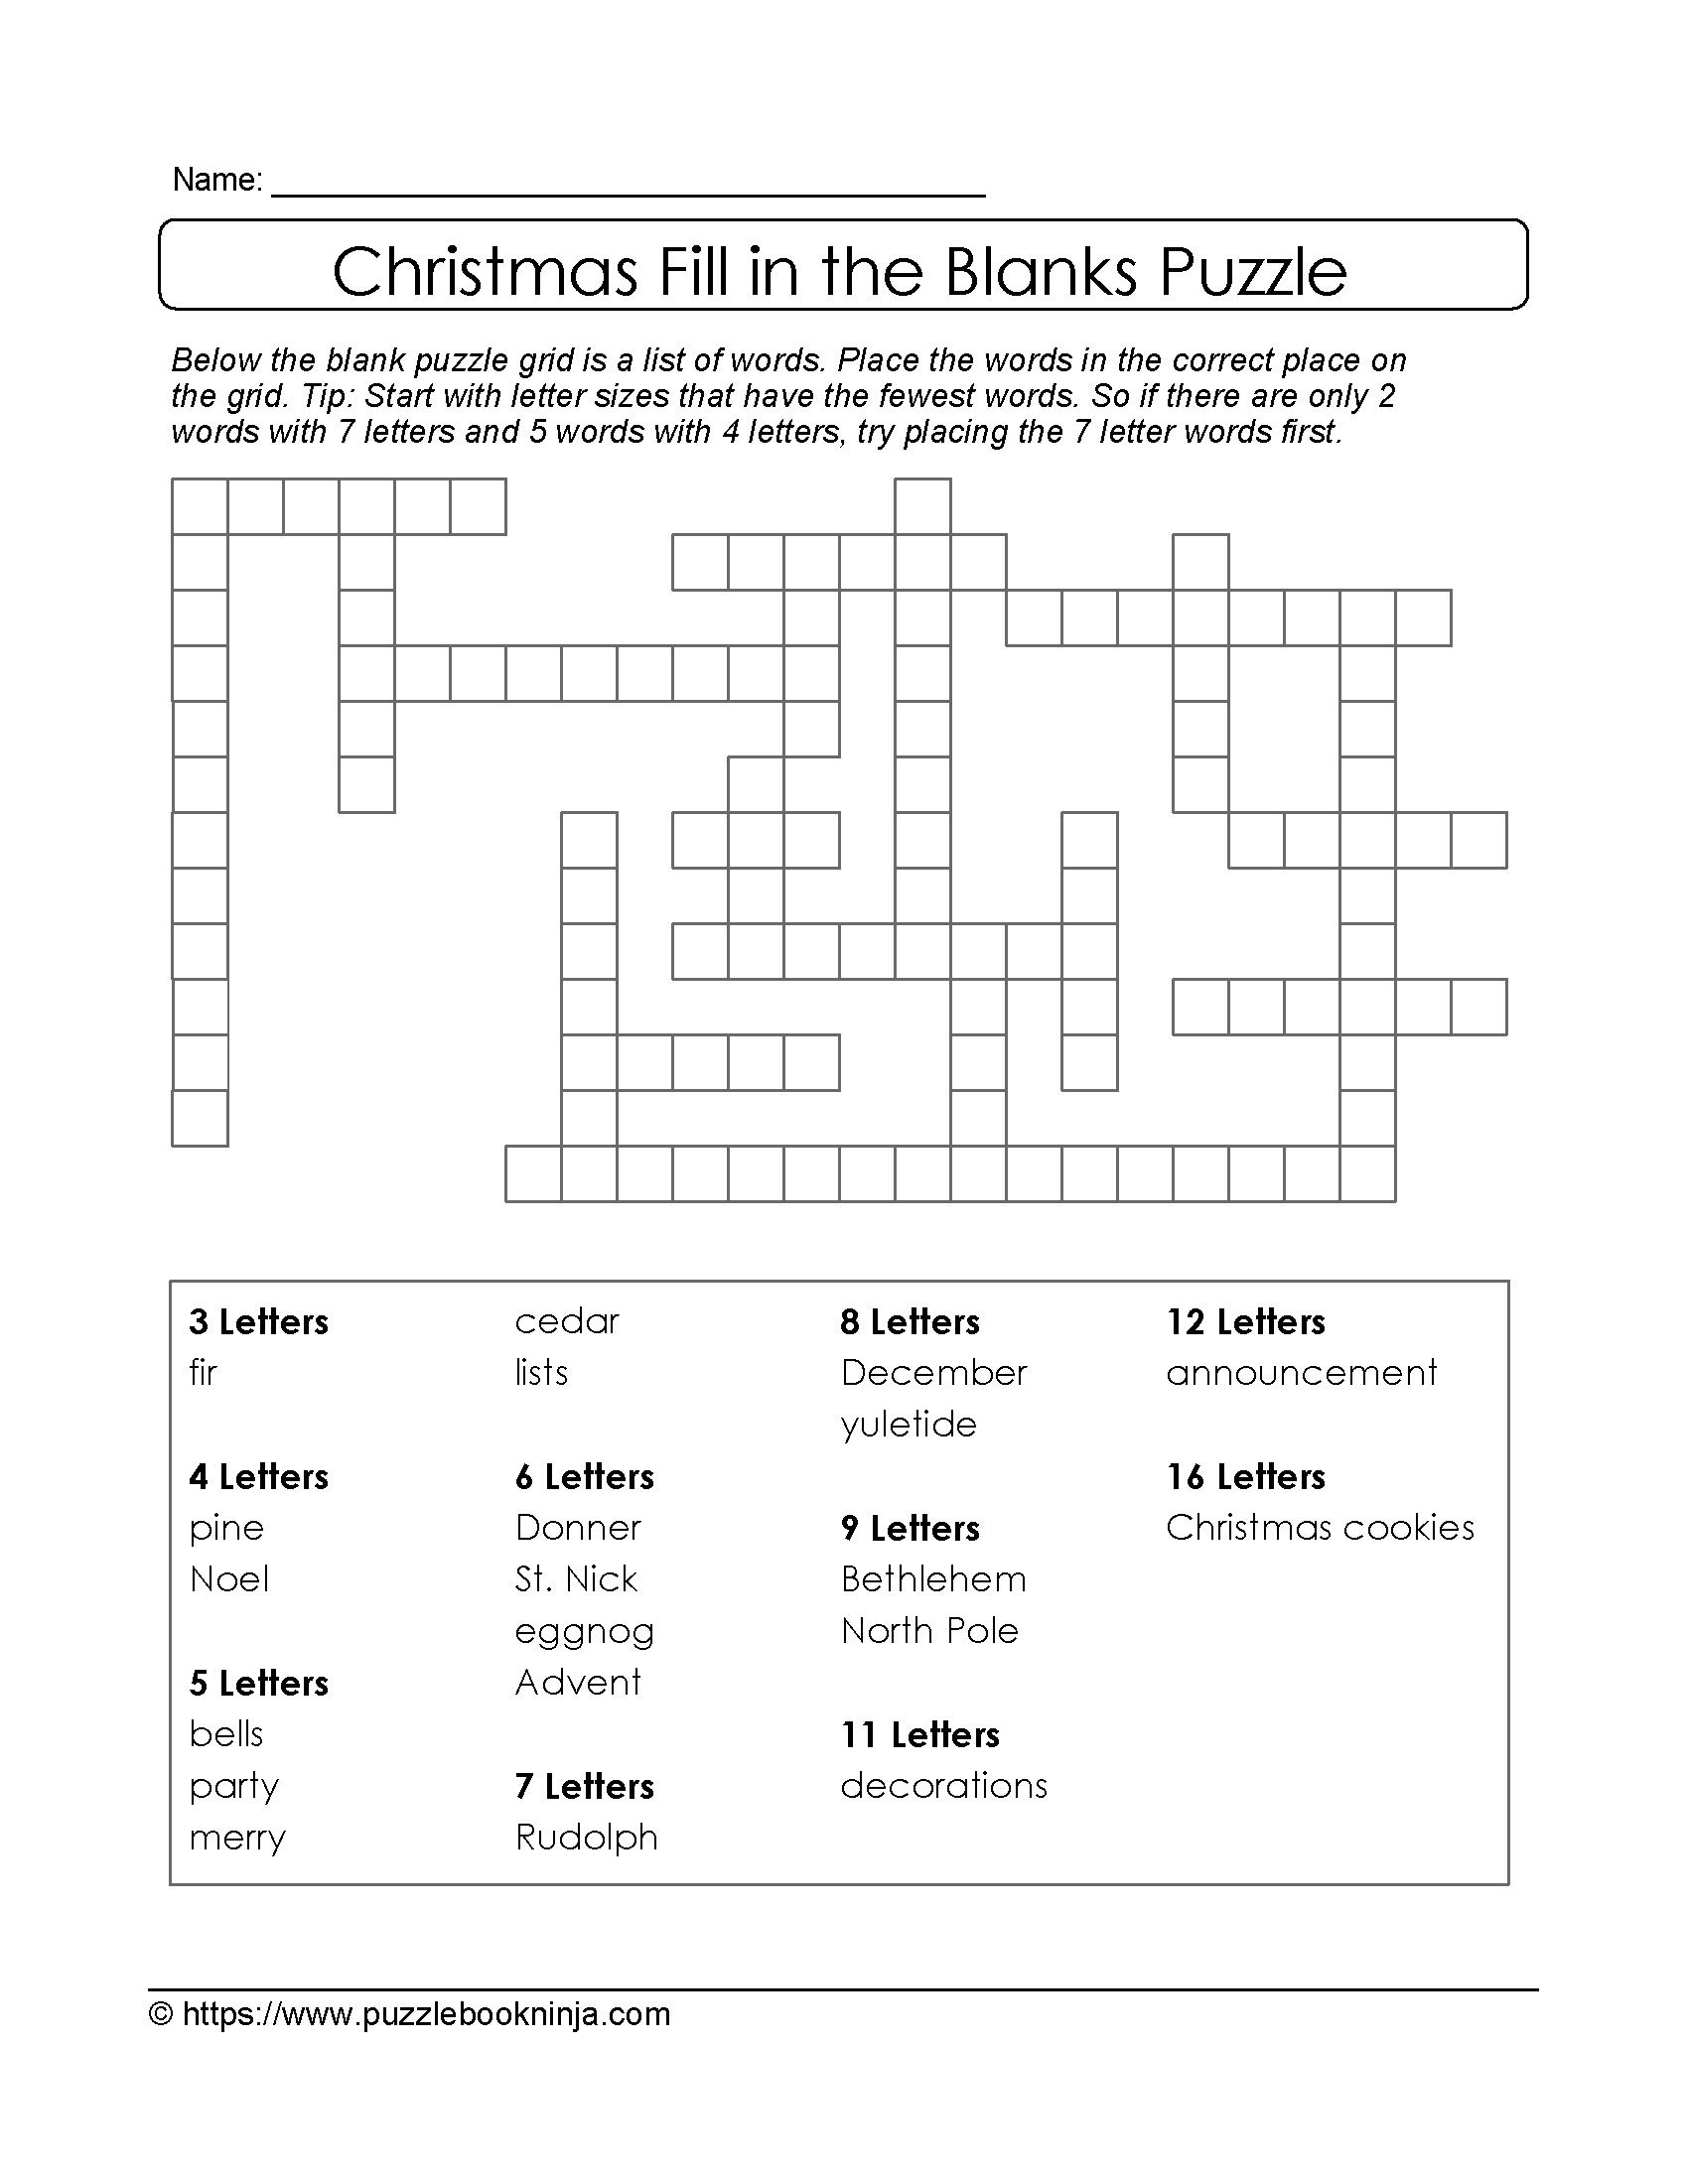 Christmas Printable Puzzle. Free Fill In The Blanks. | Christmas - Printable Blank Crossword